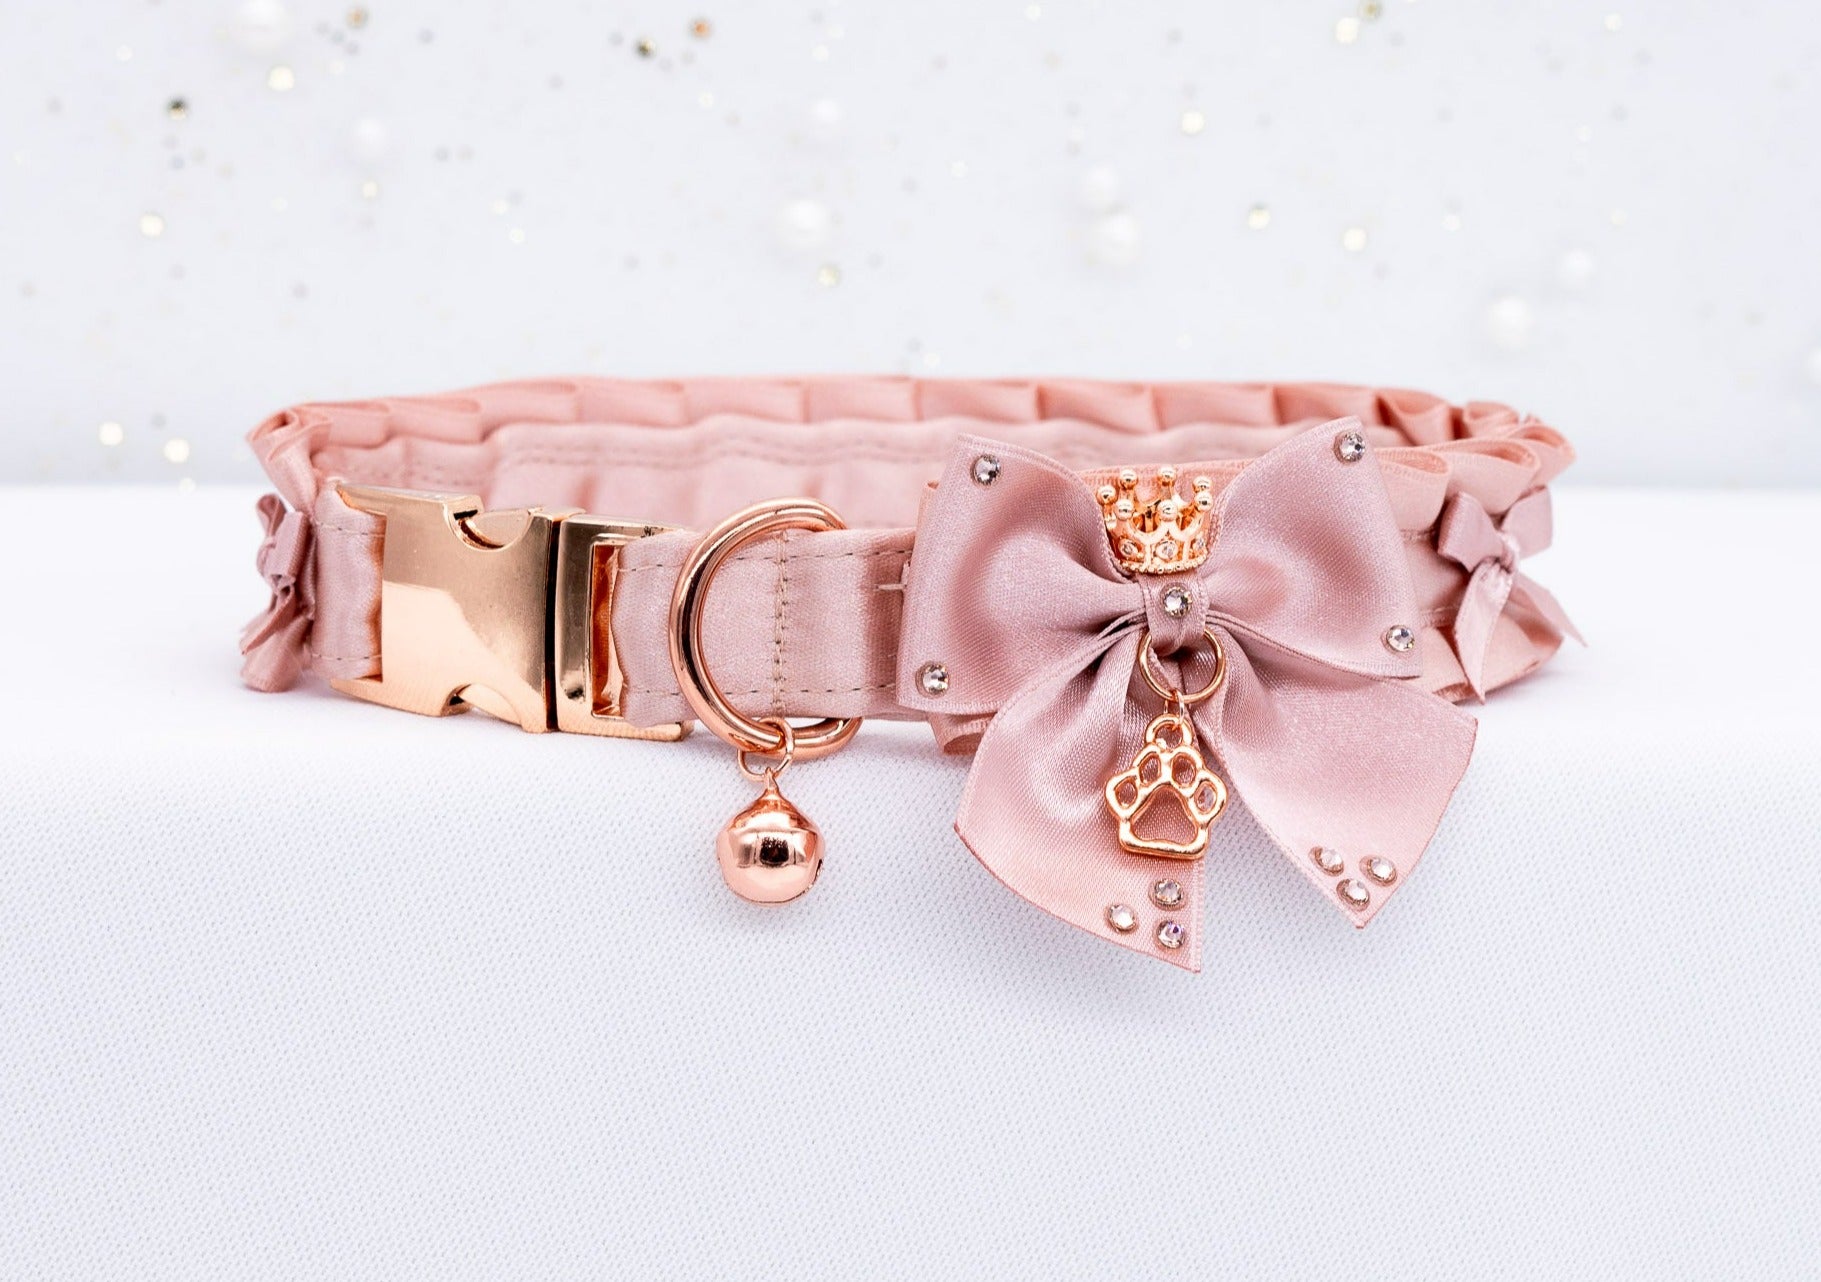 12.5" Snap Buckle Puppy Style BDSM Collar in Rose Gold